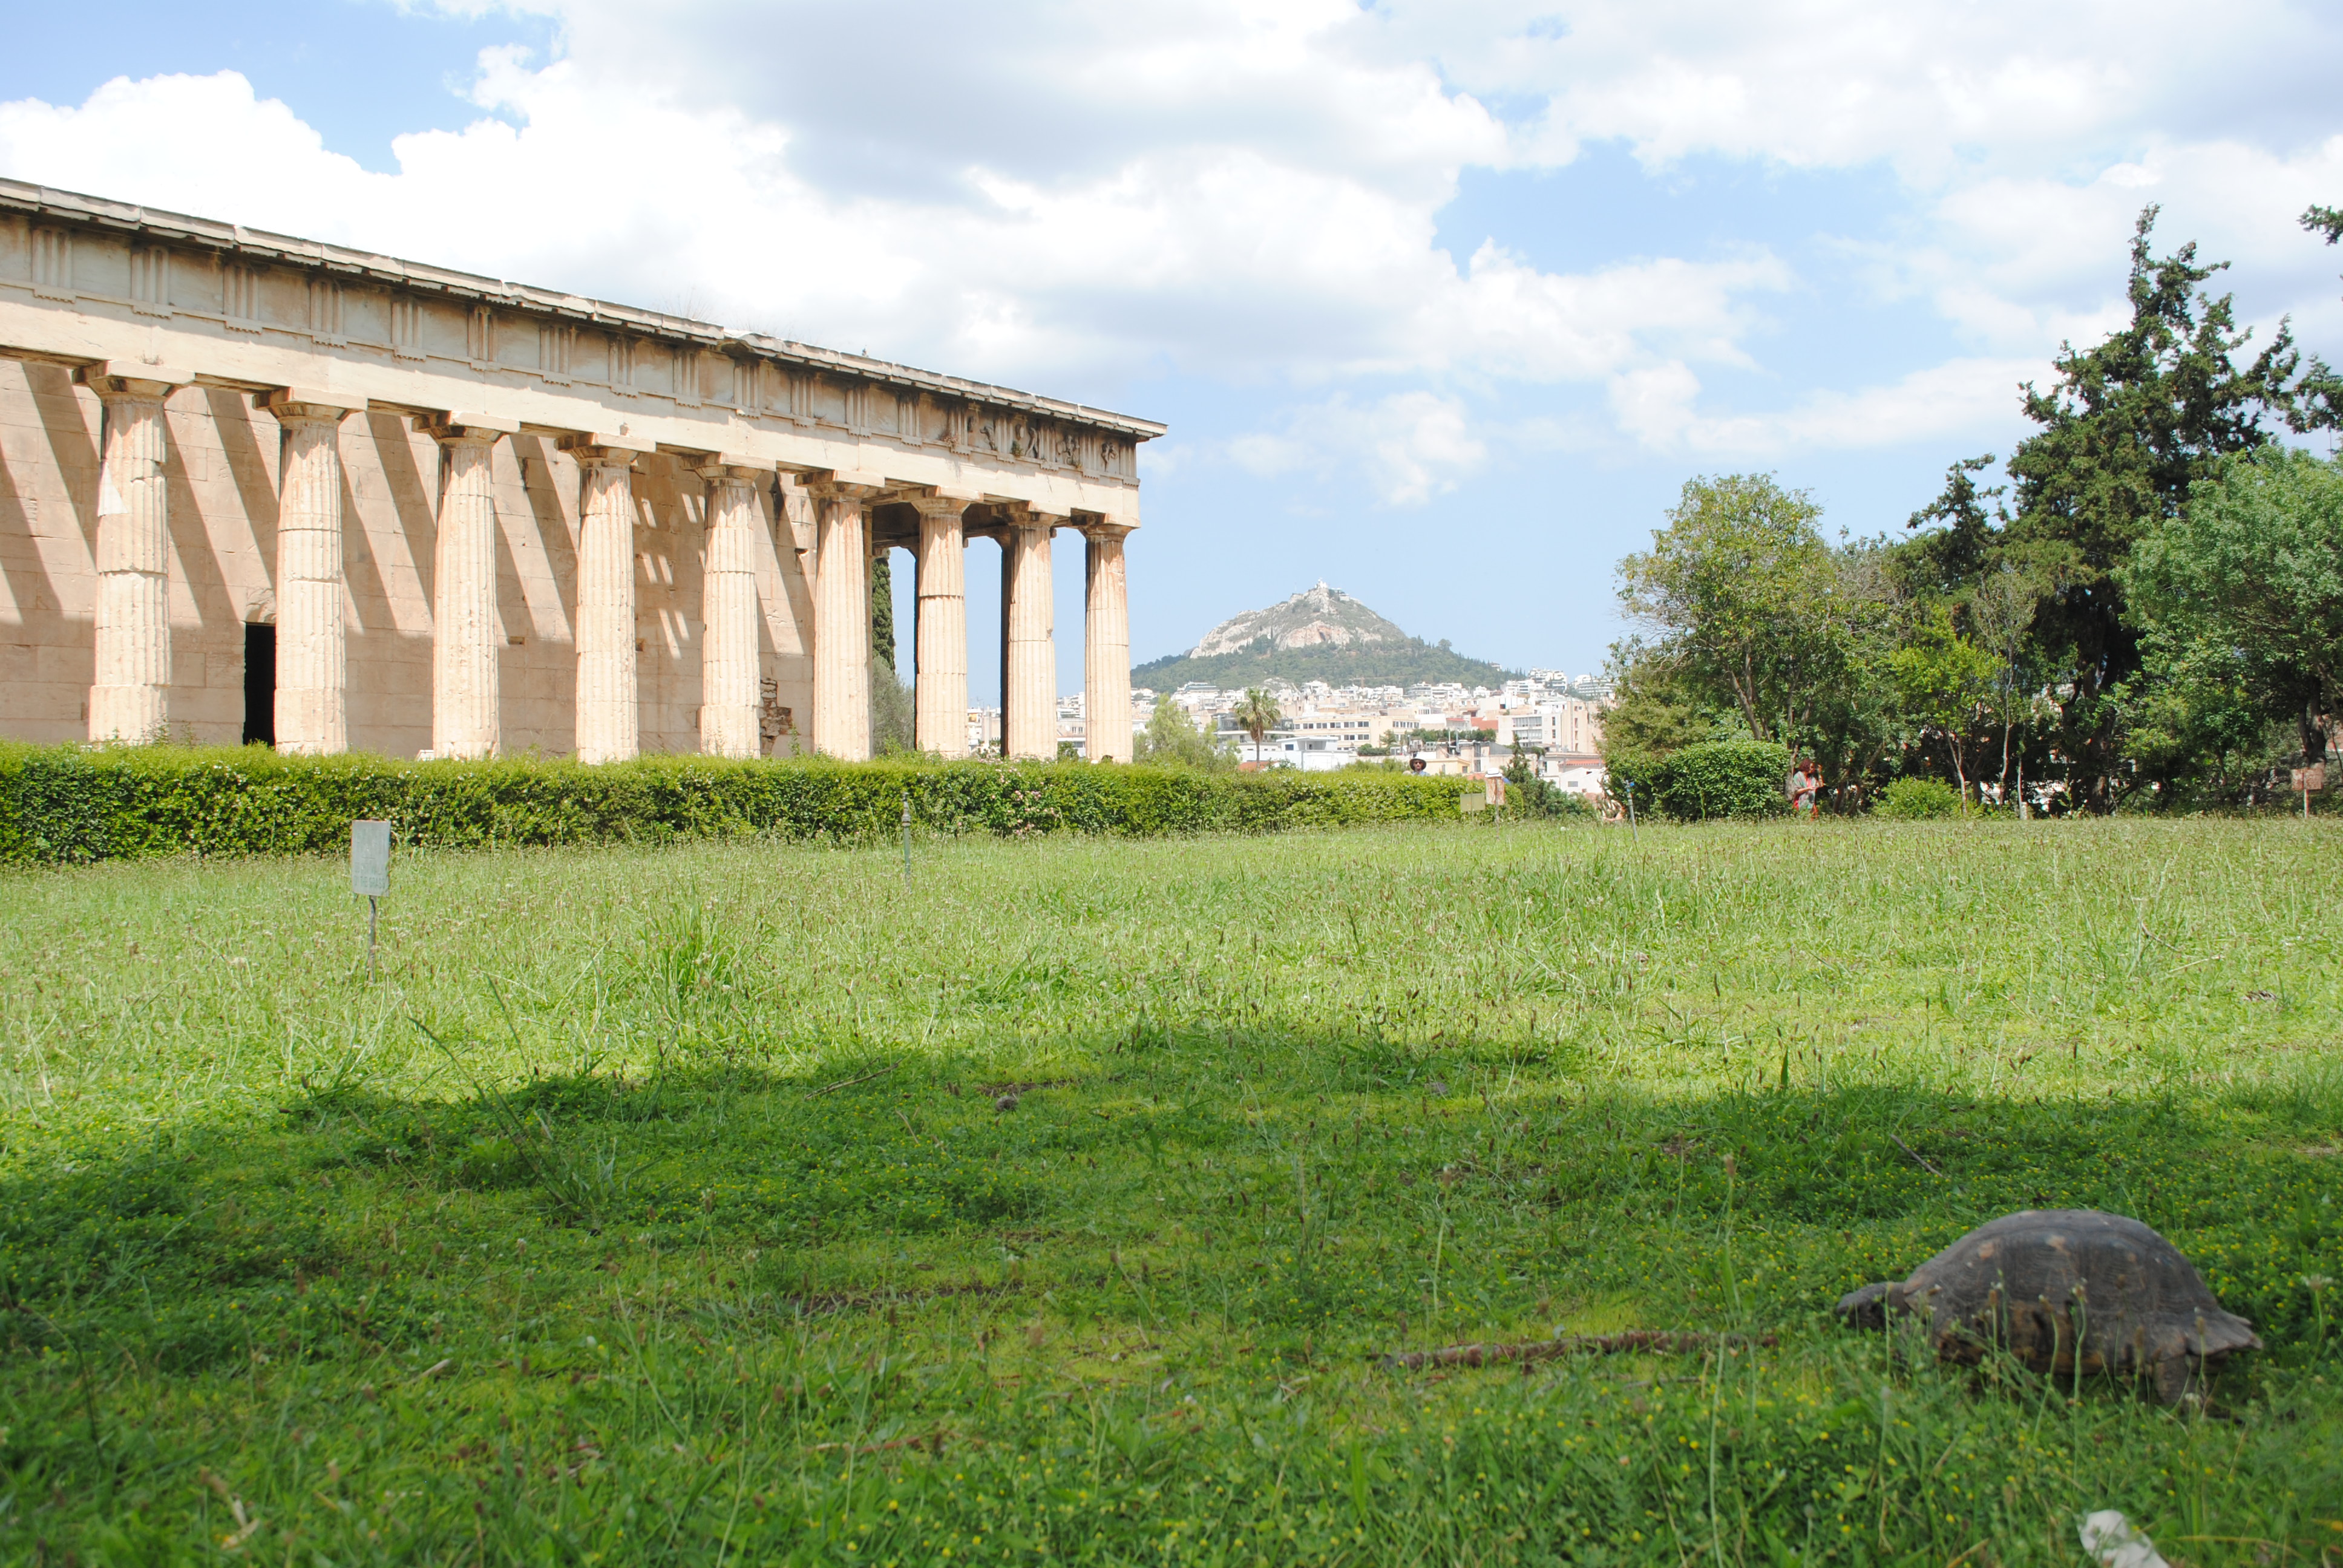 Hephaisteion at the Ancient Agora in Athens, Greece